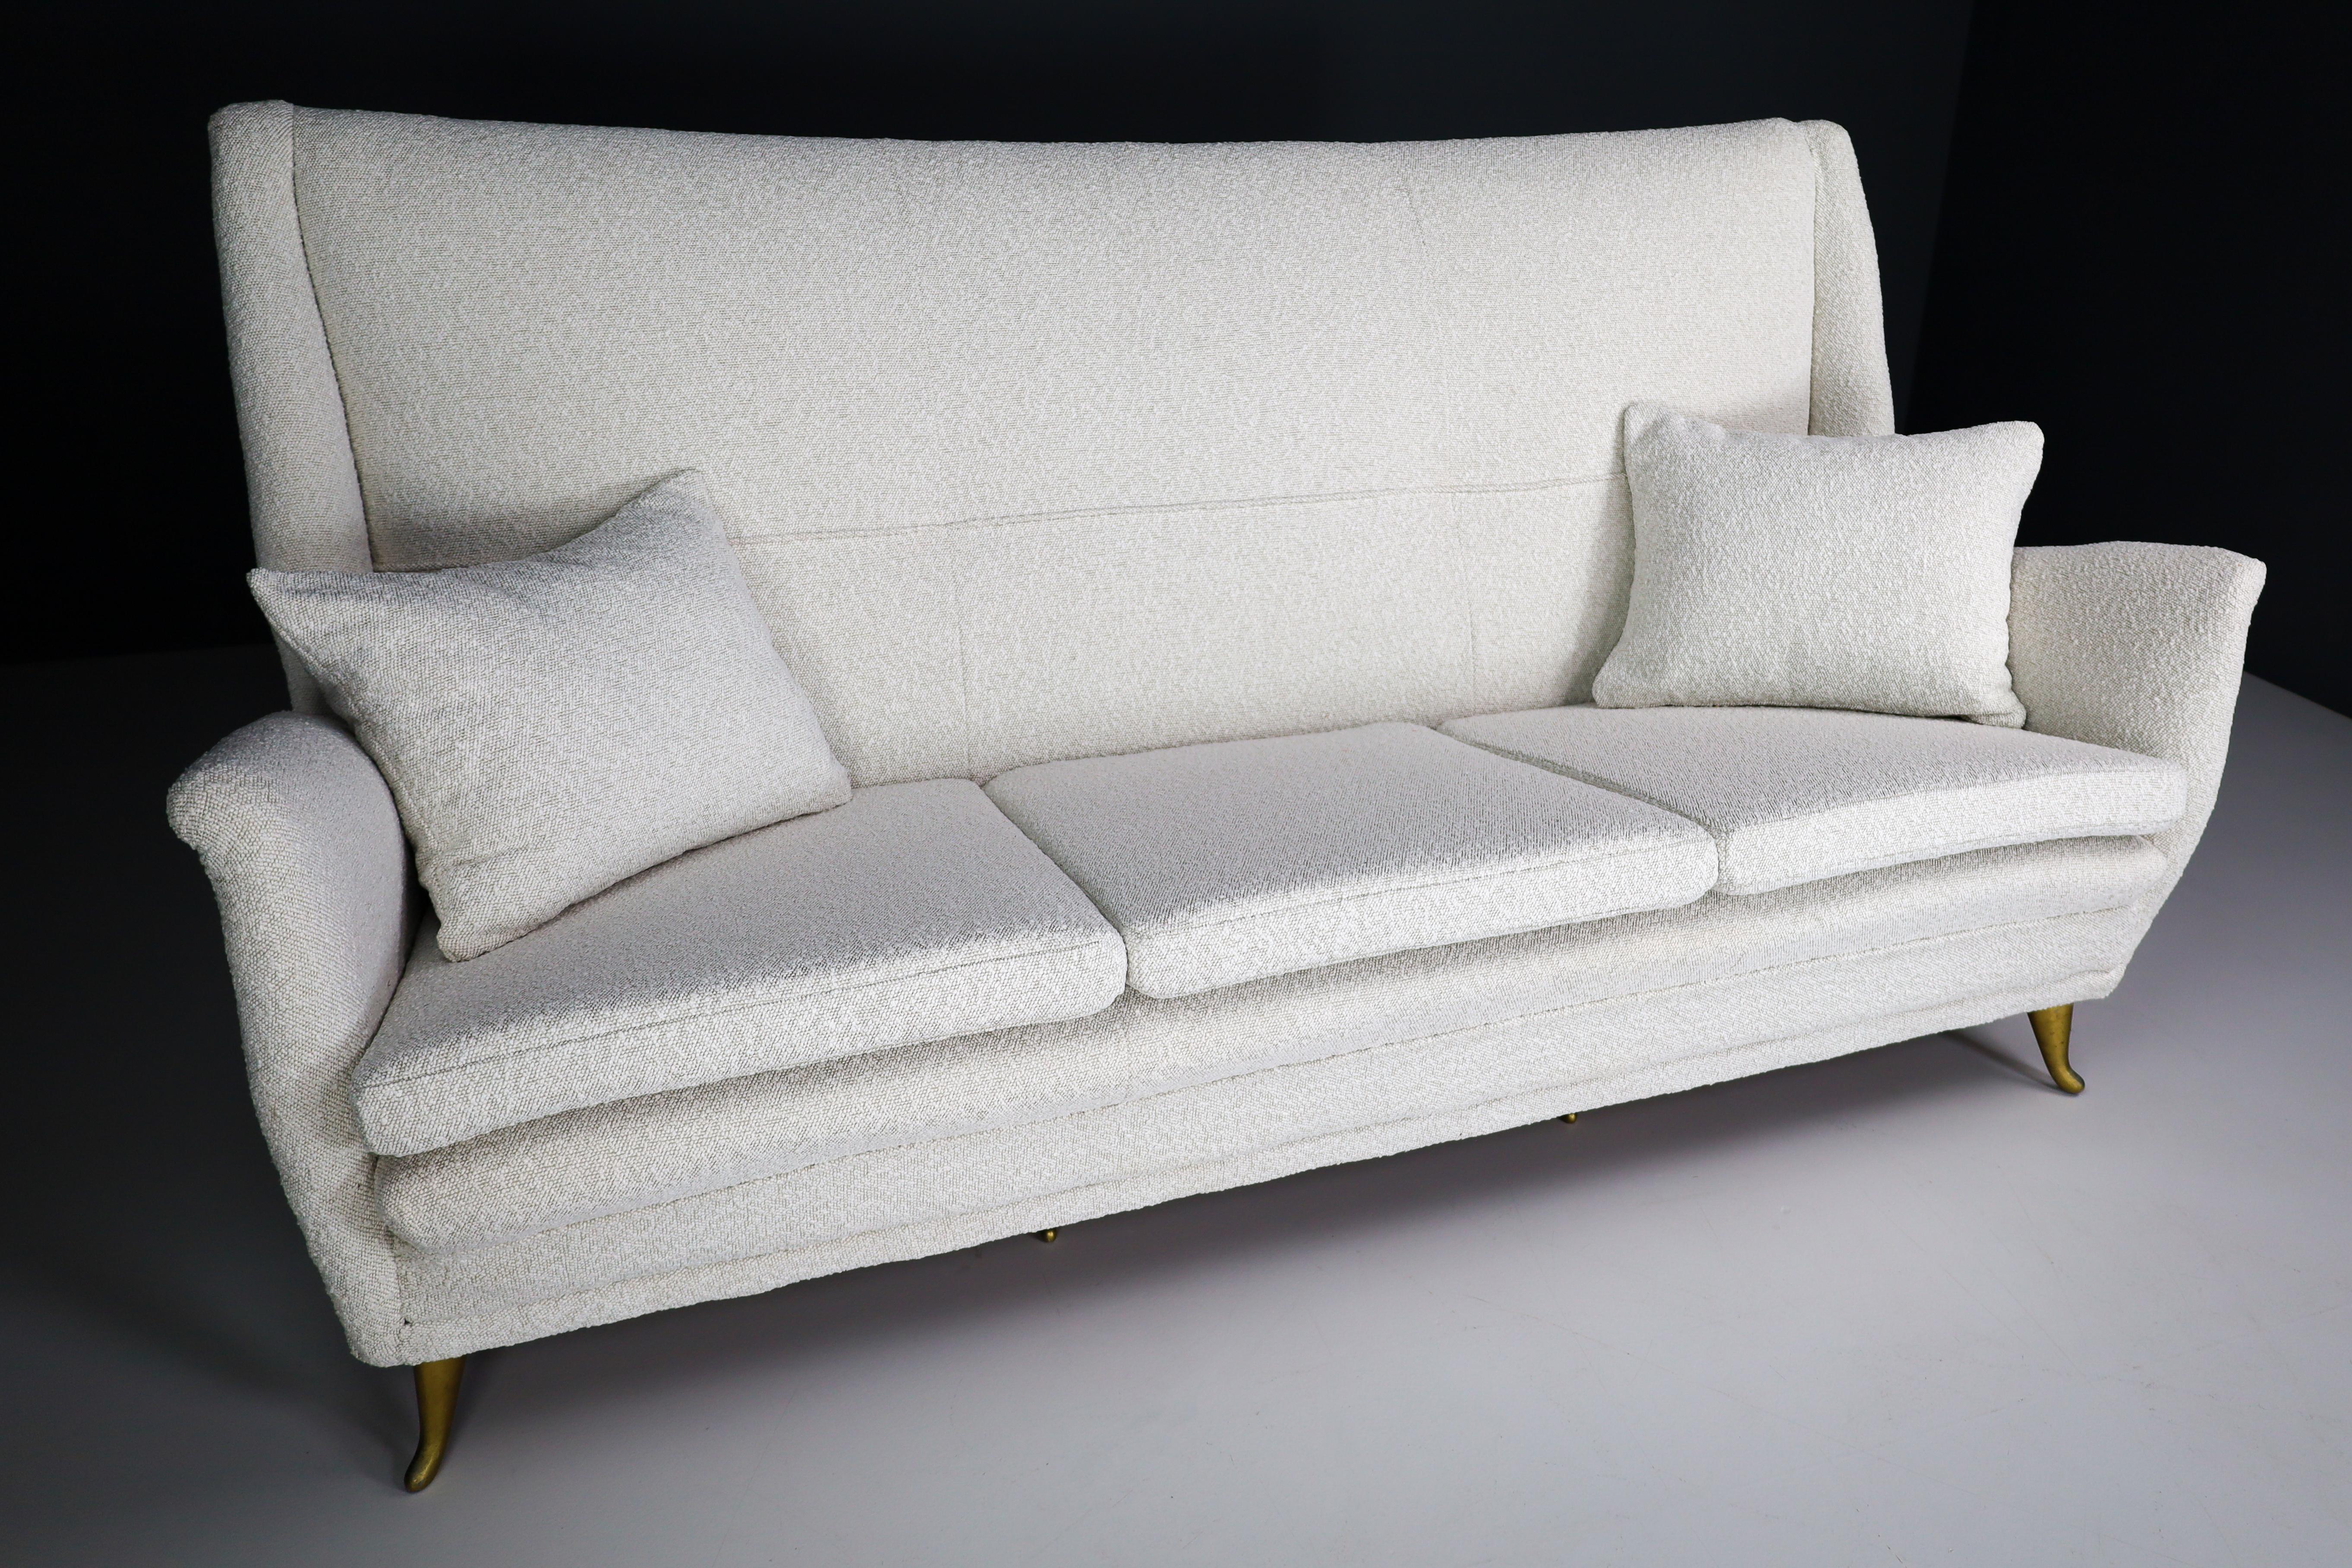 Brass High Back Sofa By Gio Ponti For ISA Bergamo in Bouclé Fabric Upholstery 1950s For Sale